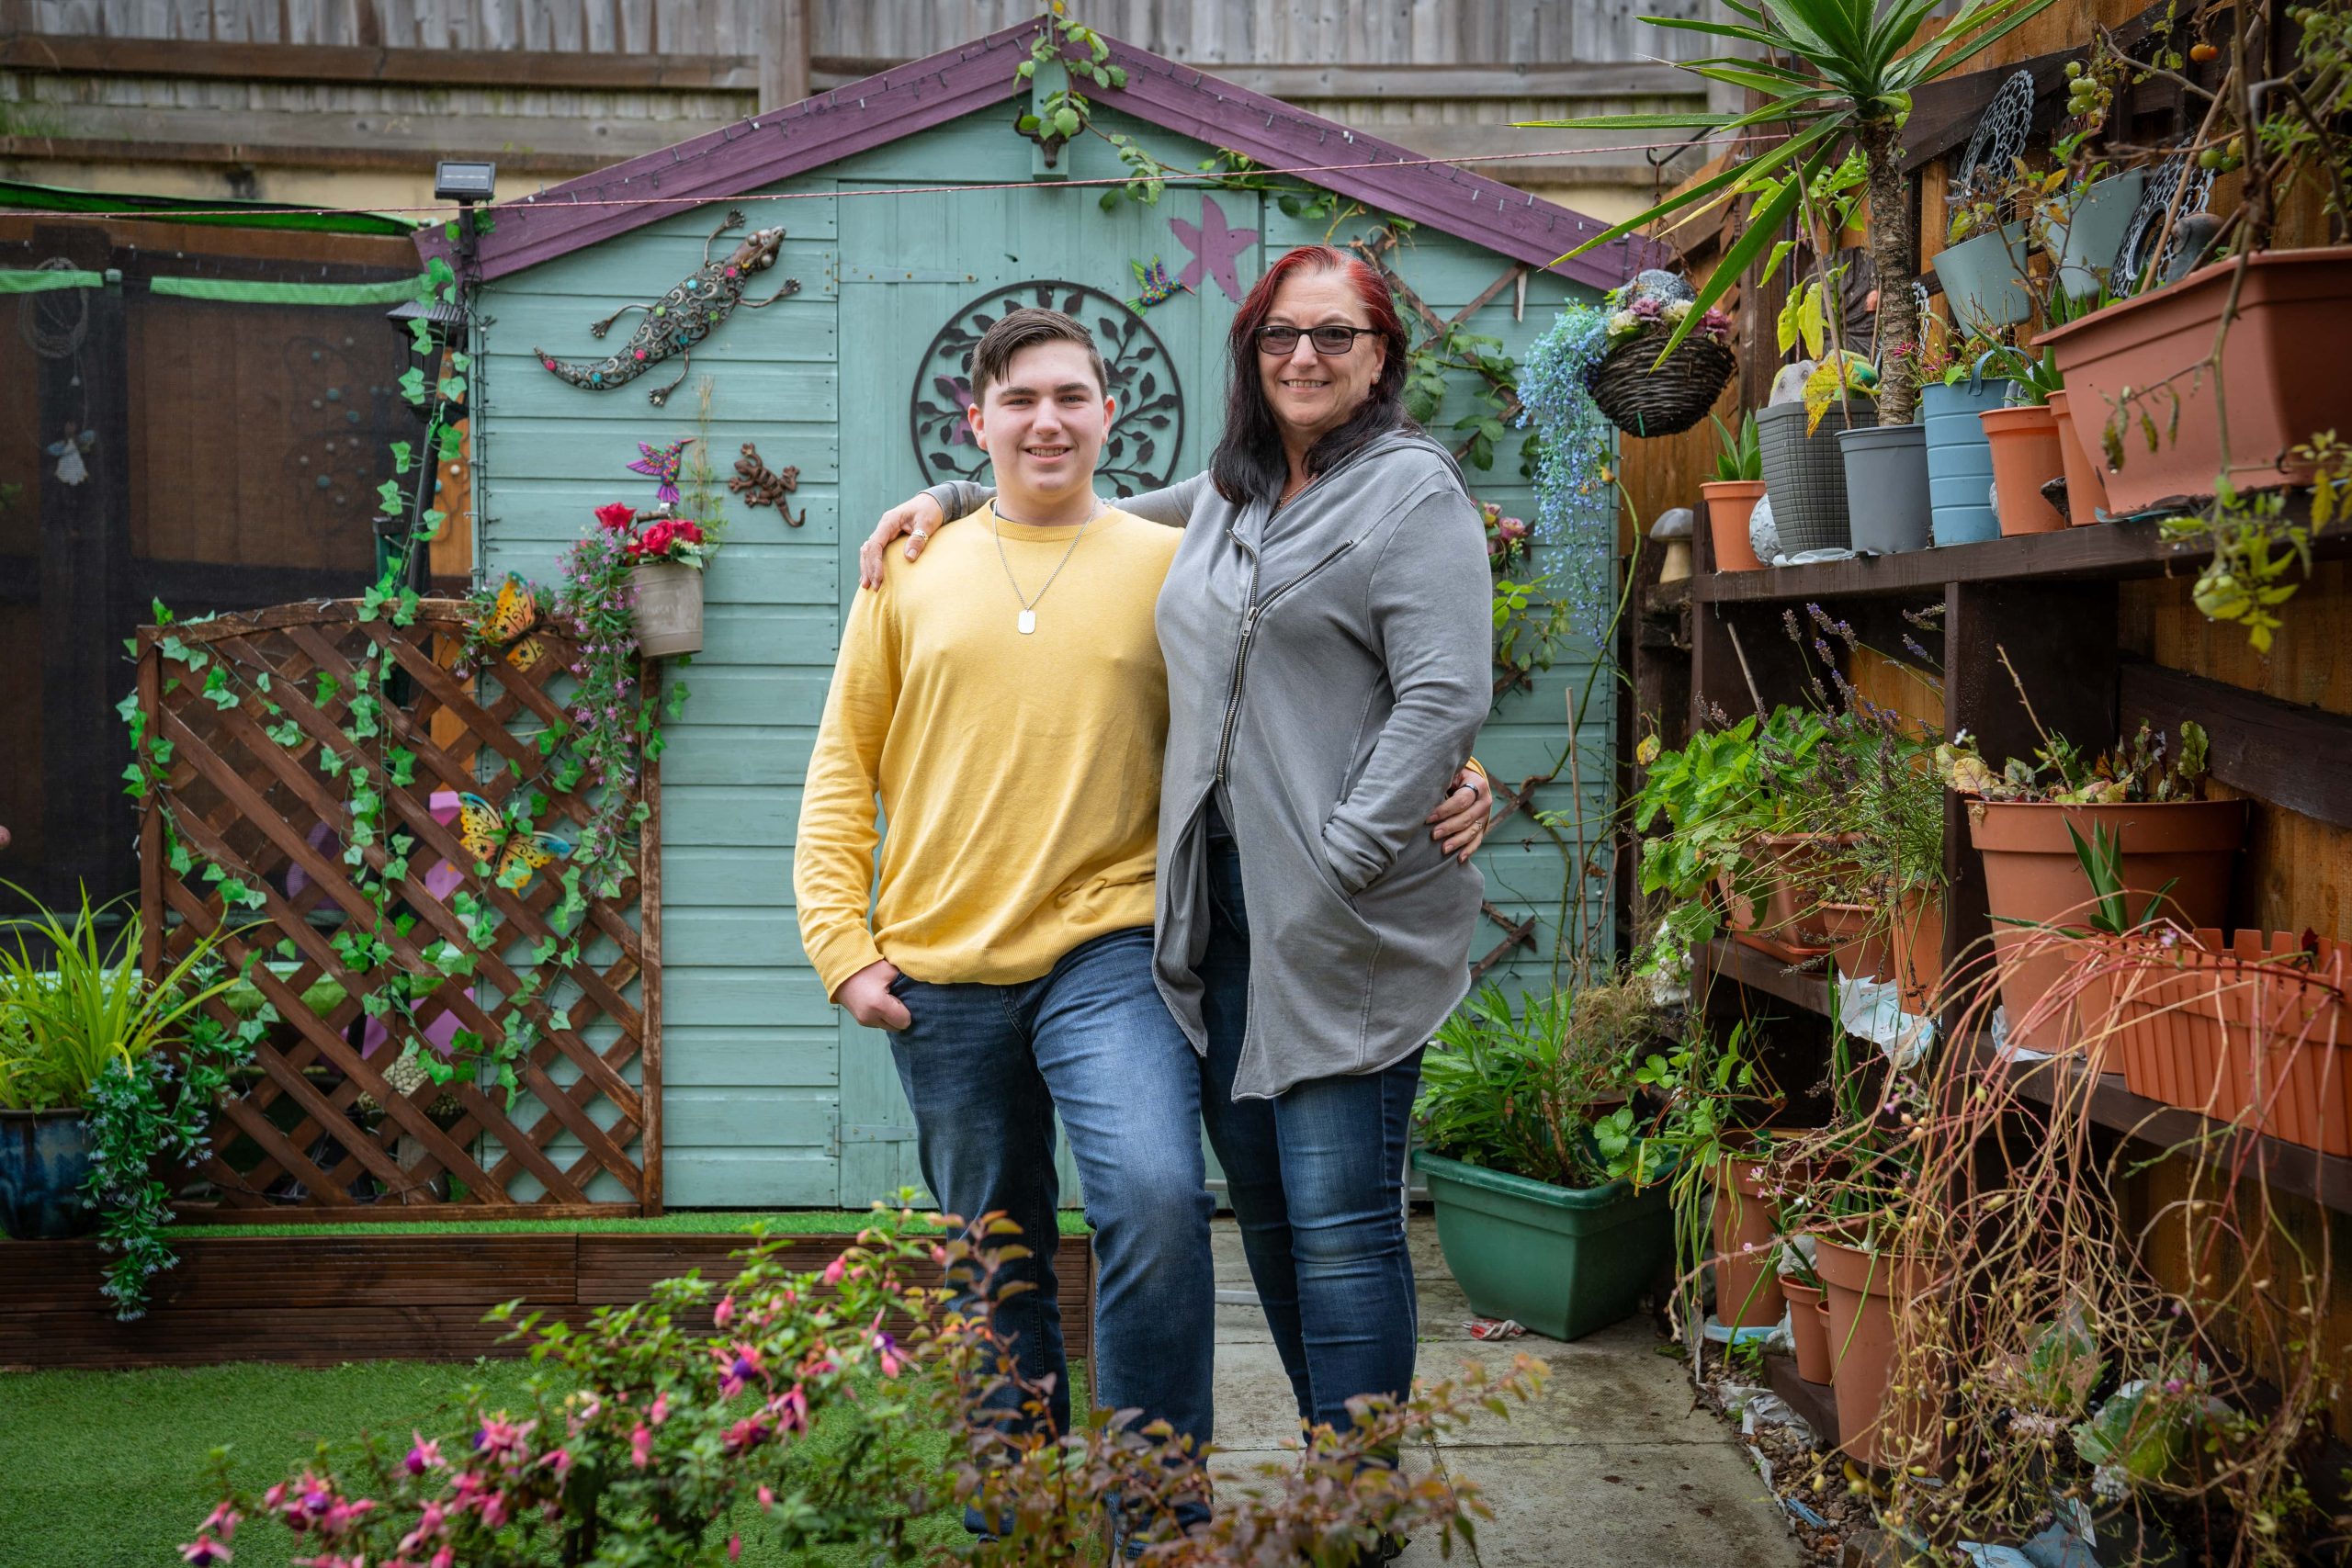 Trivallis Housing Landlord Wales A woman and a young man standing together in a Trivallis garden full of plants, smiling at the camera.